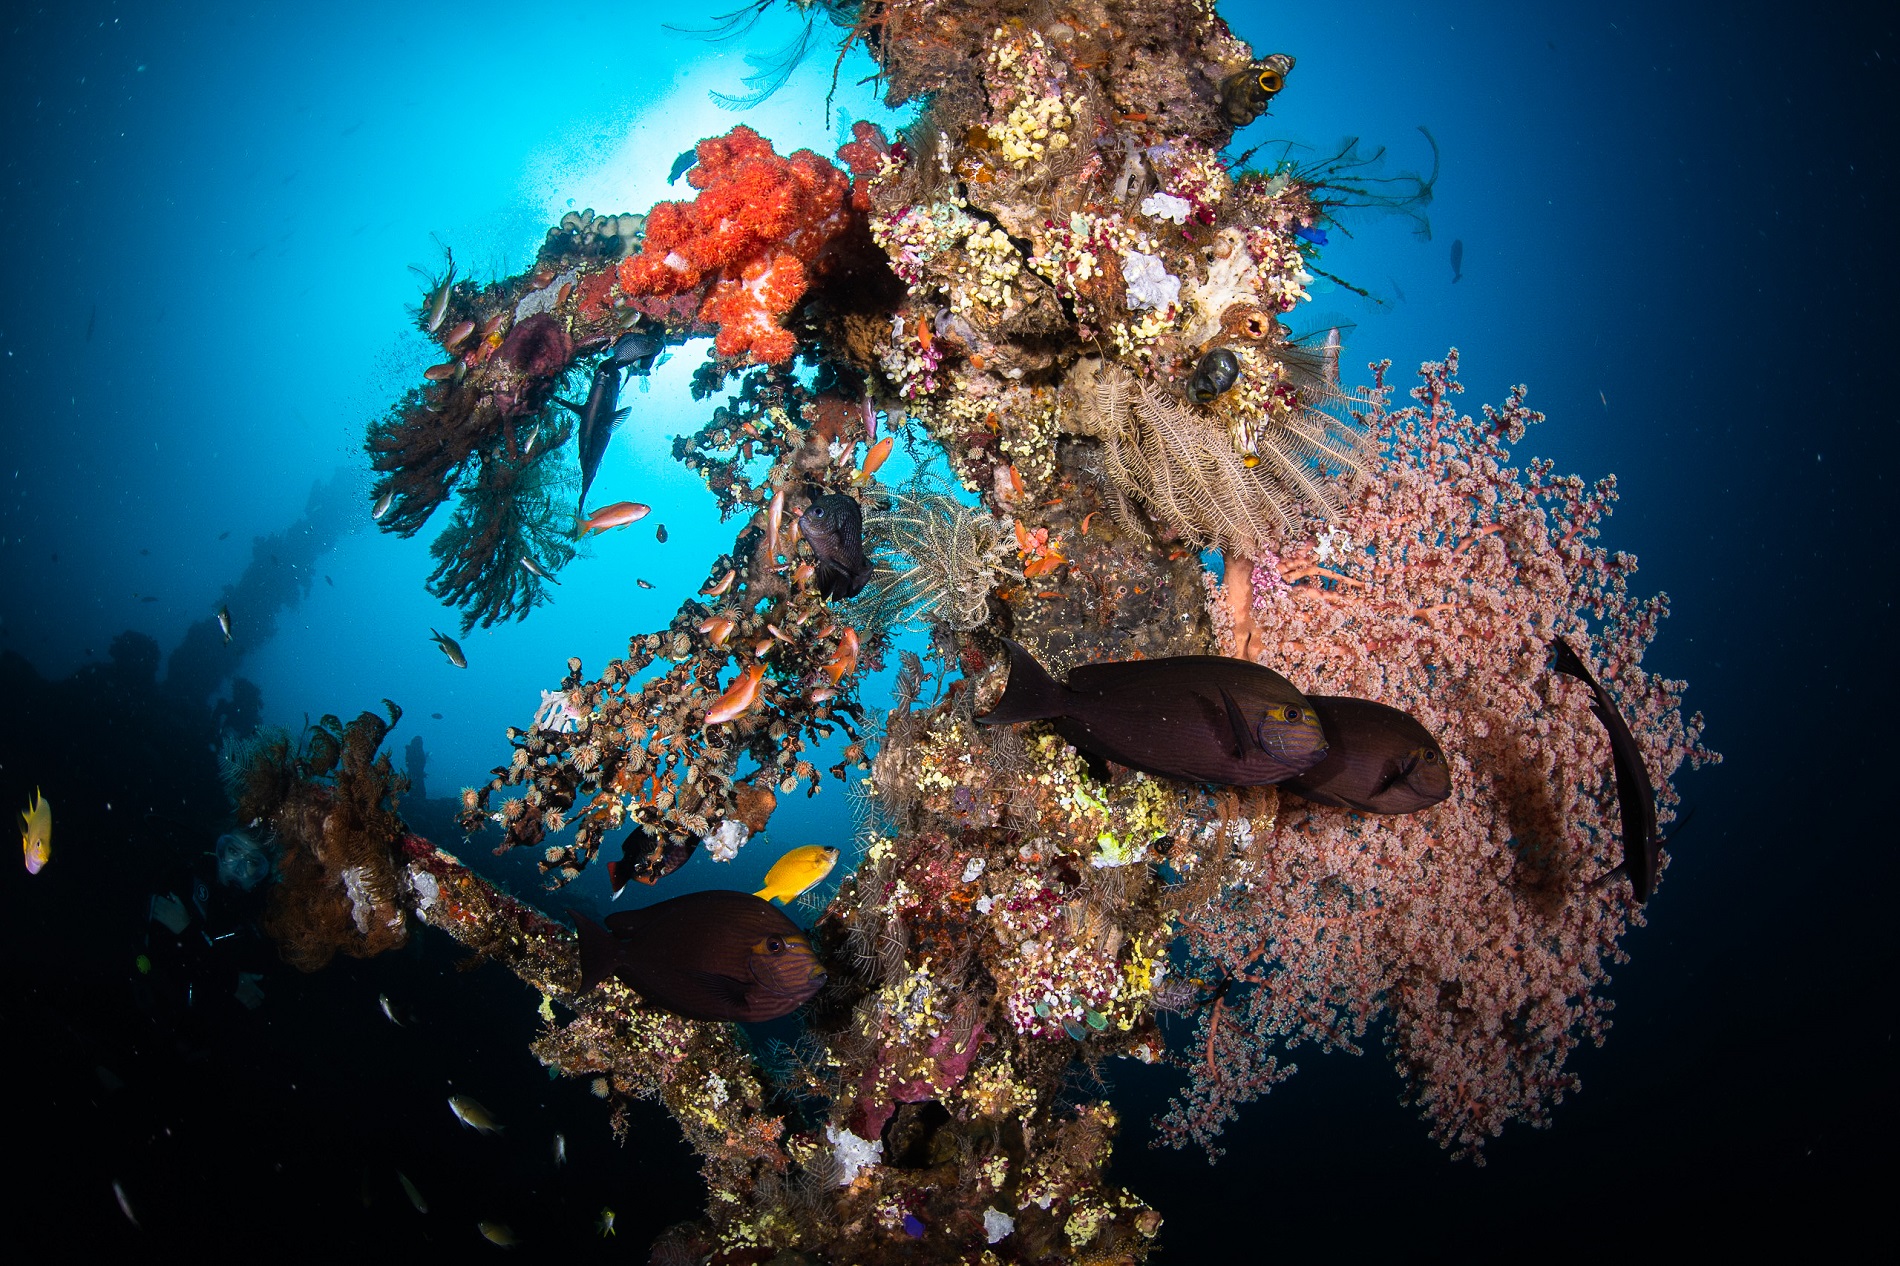 Underwater shot of the USAT Liberty wreck with colorful corals, Gorgonian fan and fish at Tulamben in East Bali